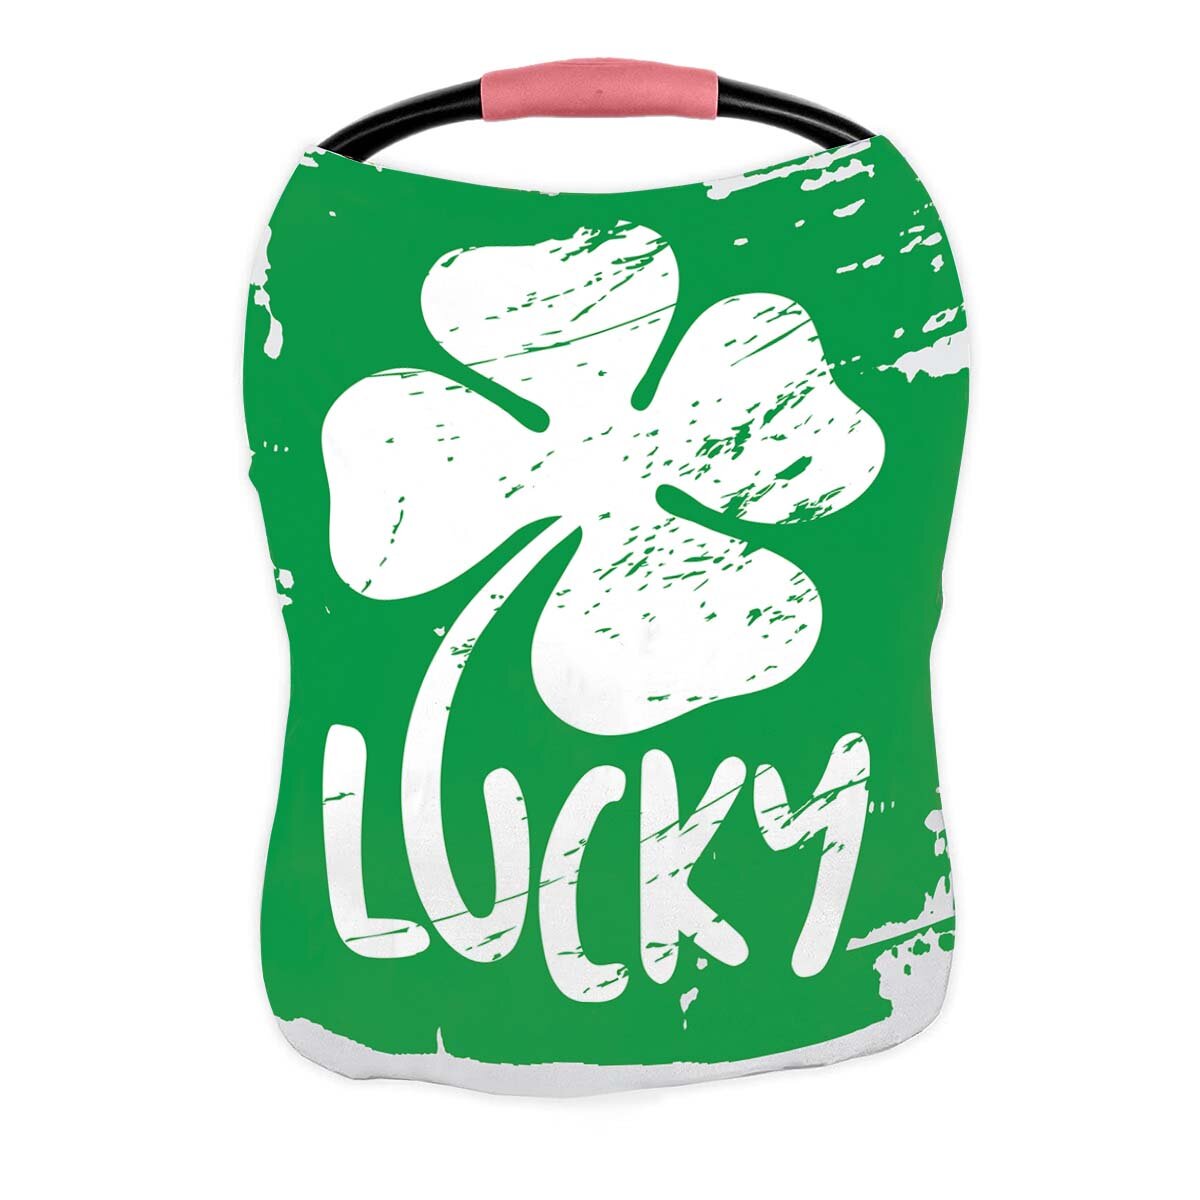 PKQWTM Talisman Clover The Words Luck Nursing Cover Baby Breastfeeding Infant Feeding Cover Baby Car Seat Cover